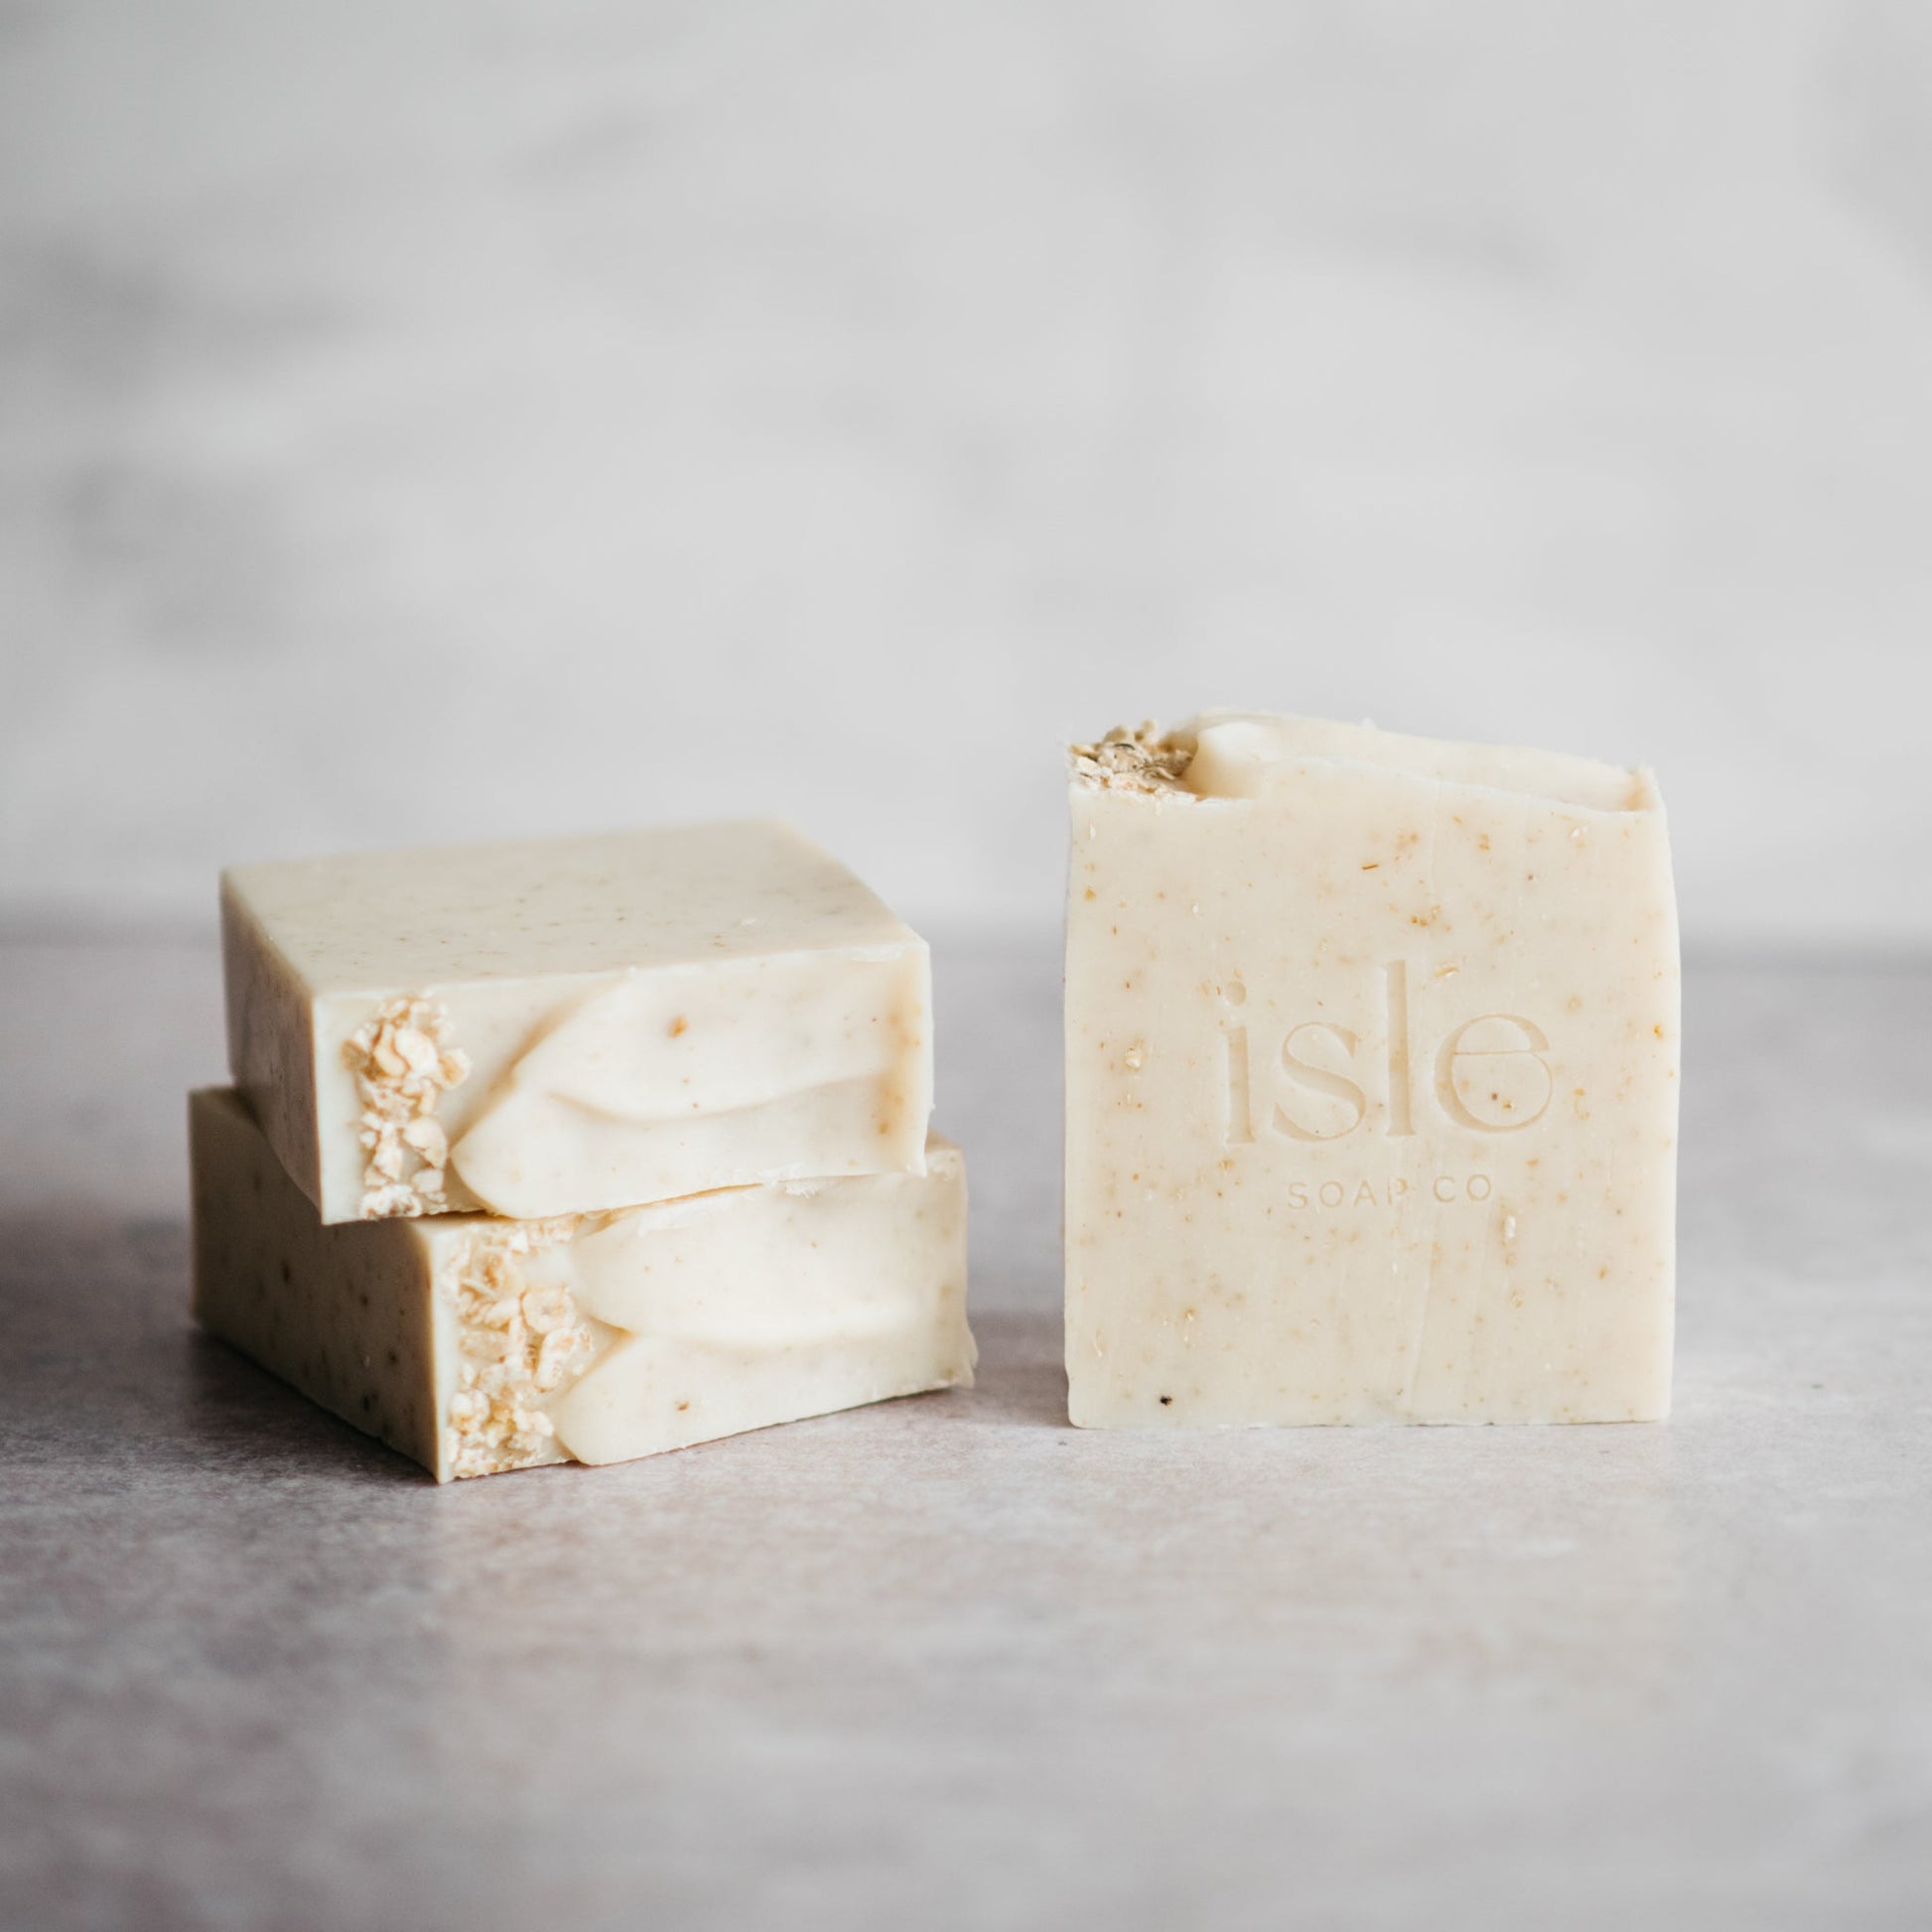 2 square bars of soap stacked on top of each other and a third bar standing up. The soap is cream and shows a scattering of oats on the top. 